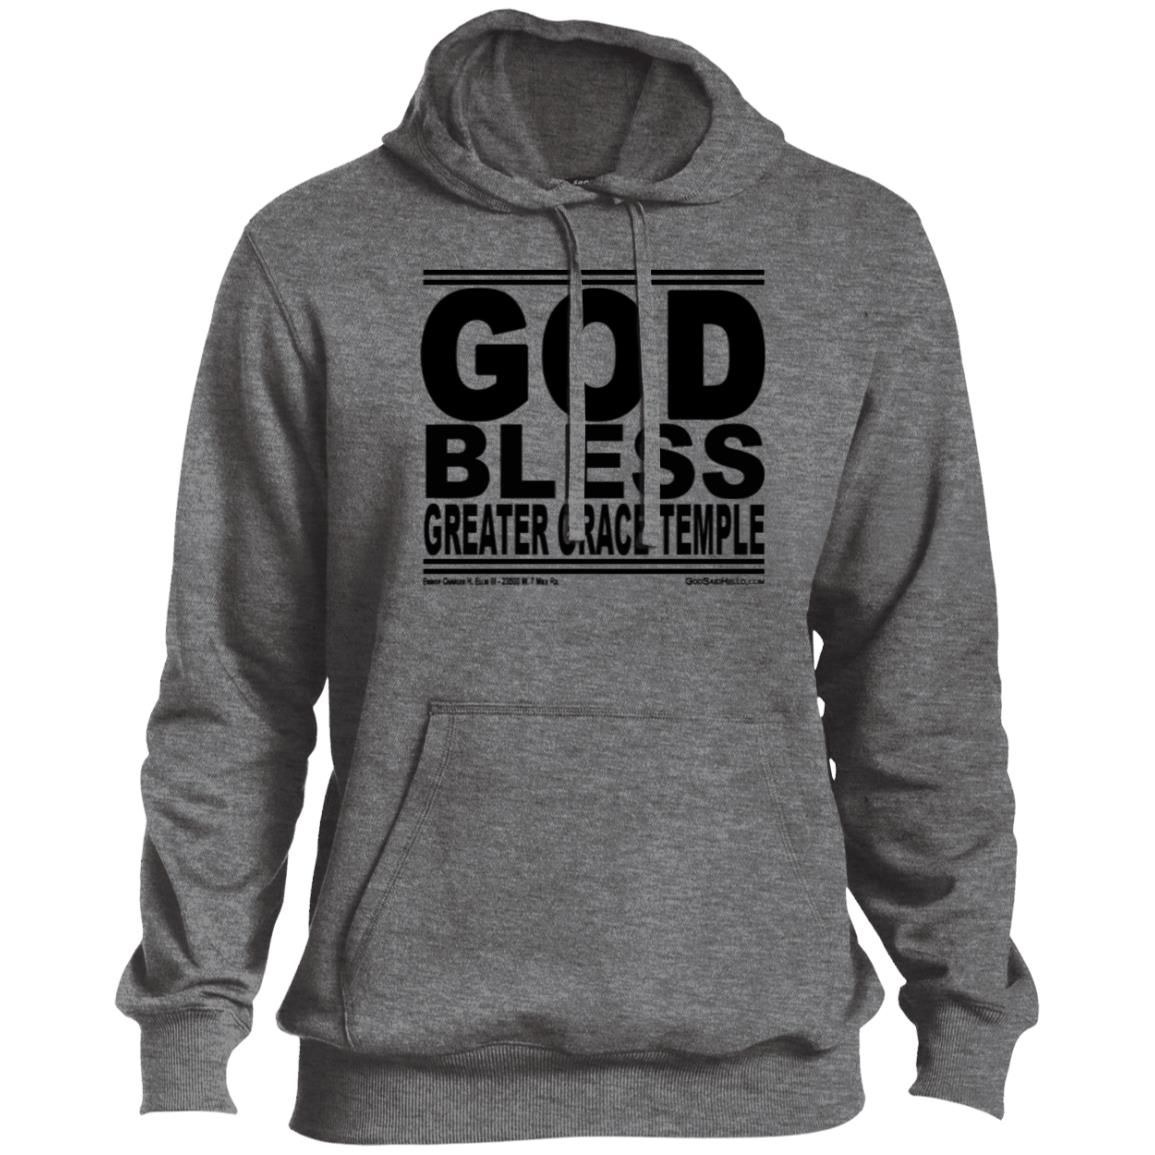 #GodBlessGreaterGraceTemple - Pullover Hoodie